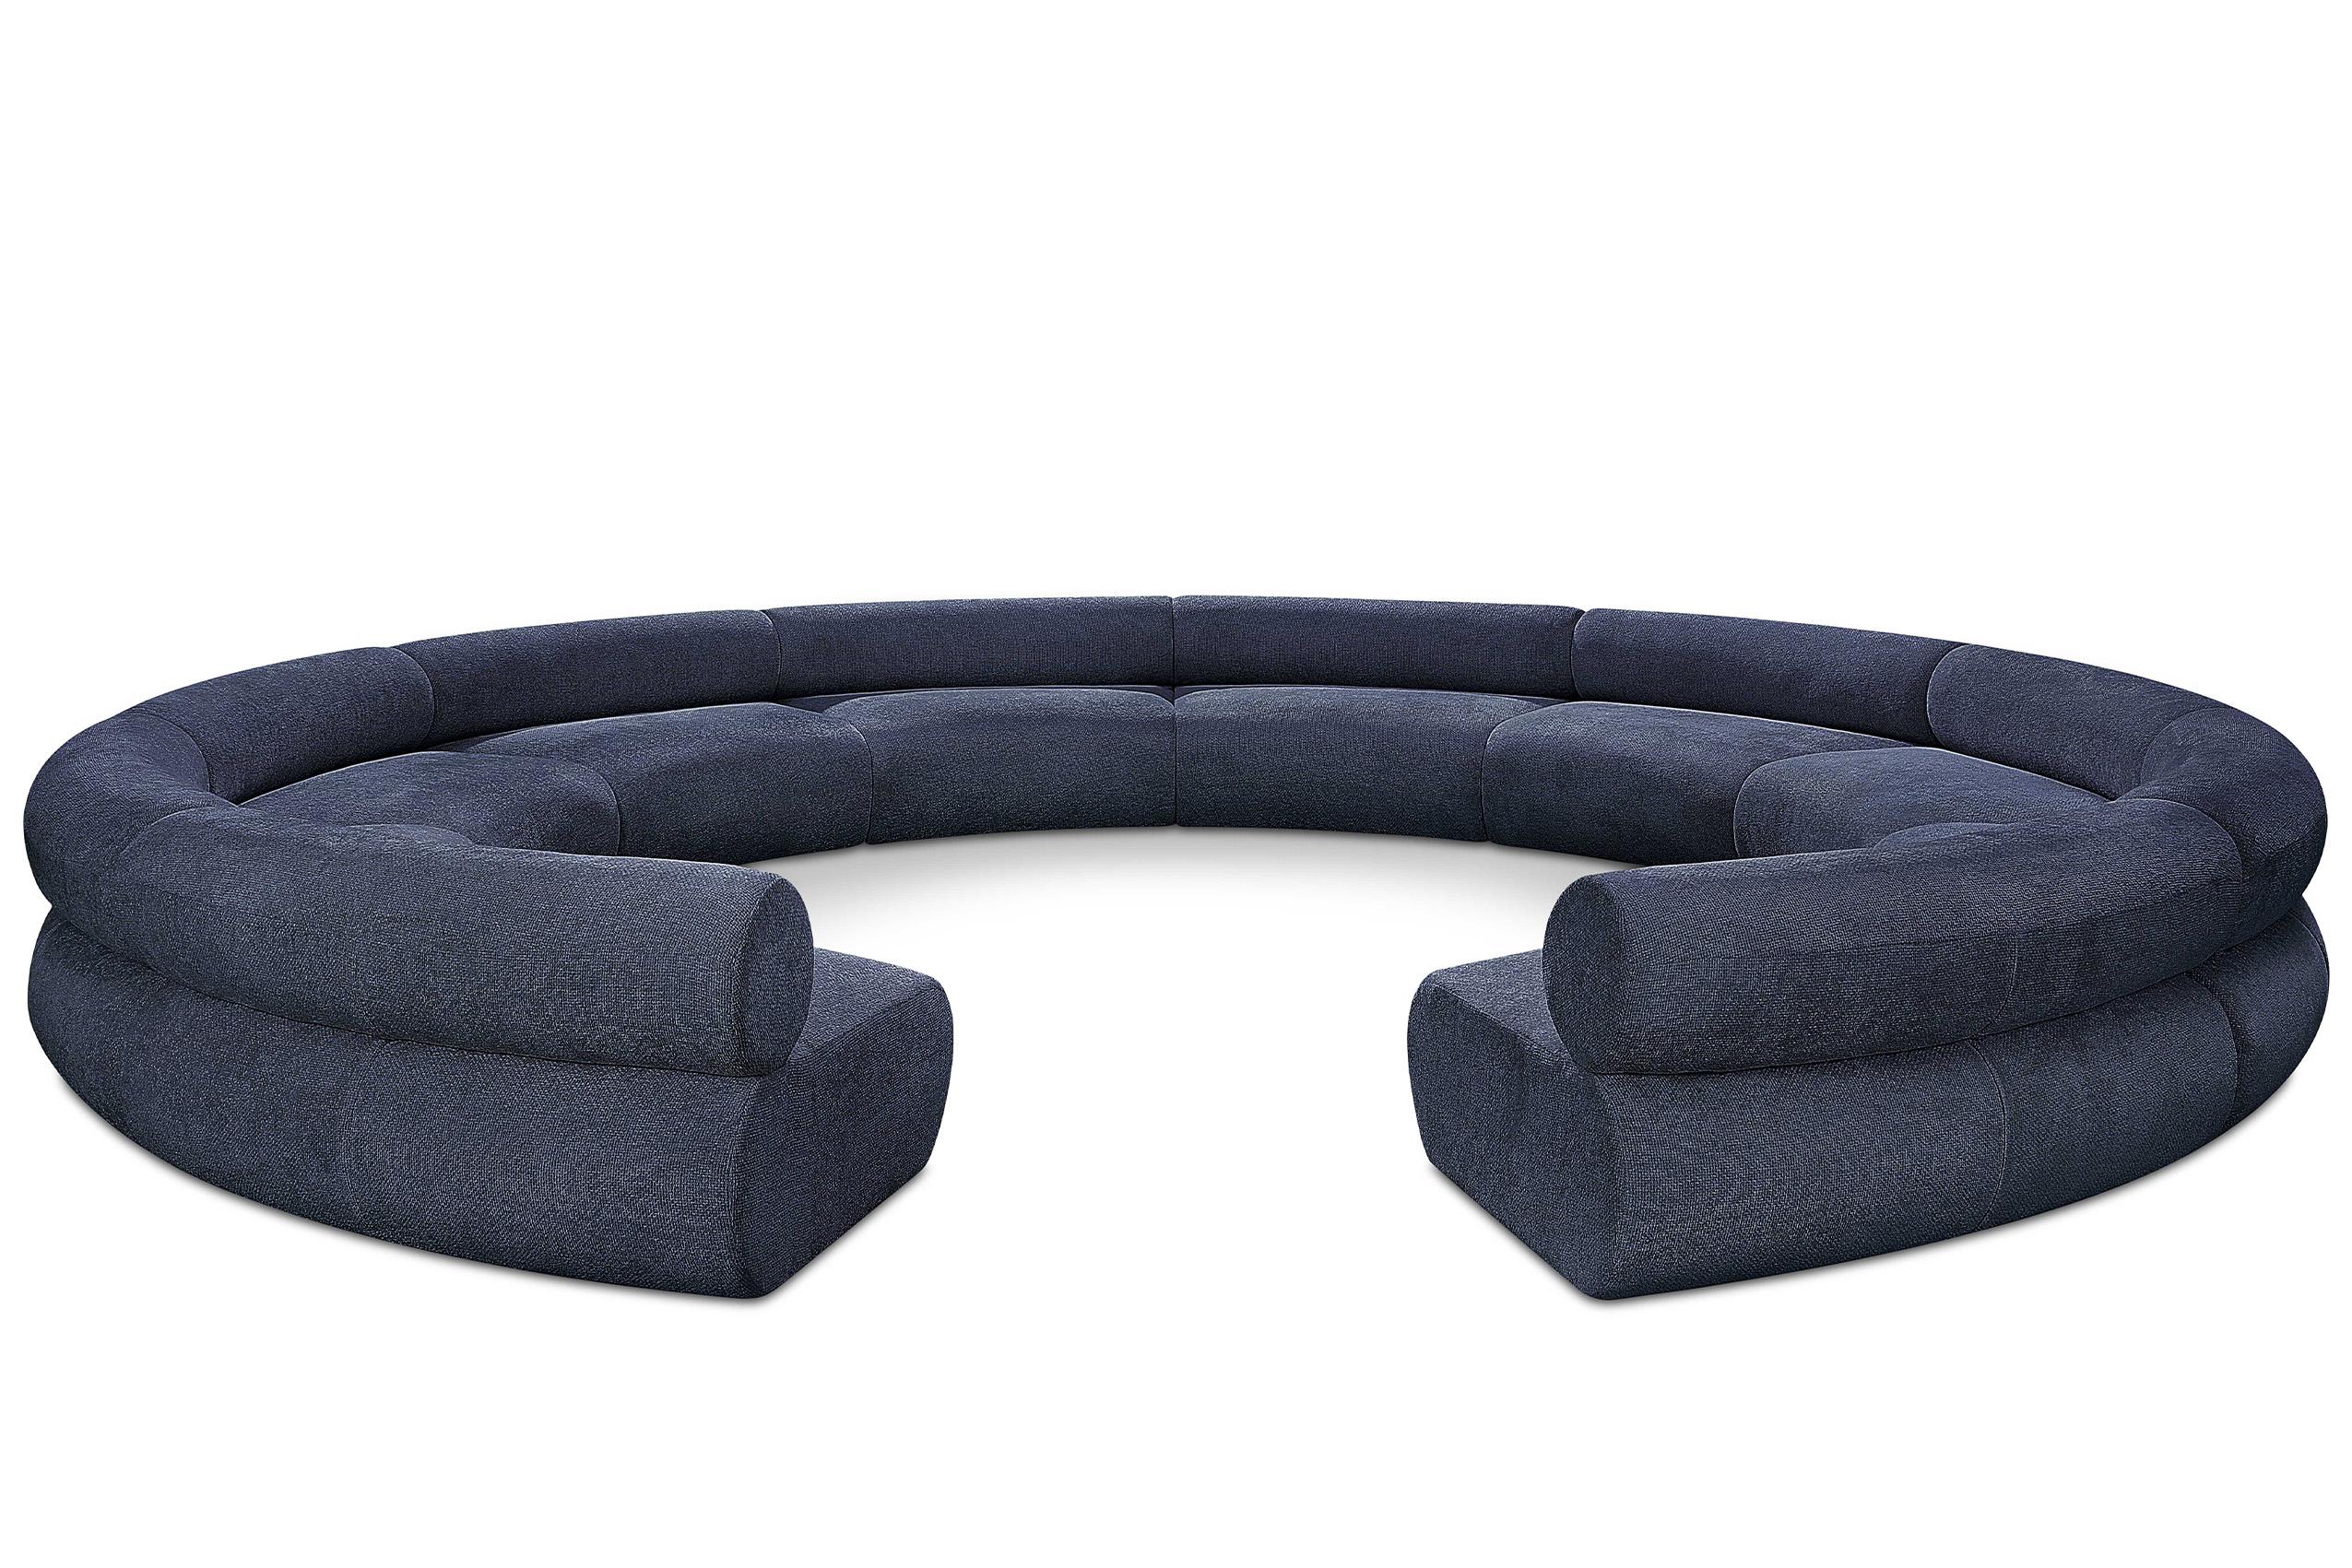 Contemporary, Modern Modular Sectional Sofa Bale 114Navy-S10A 114Navy-S10A in Navy Chenille